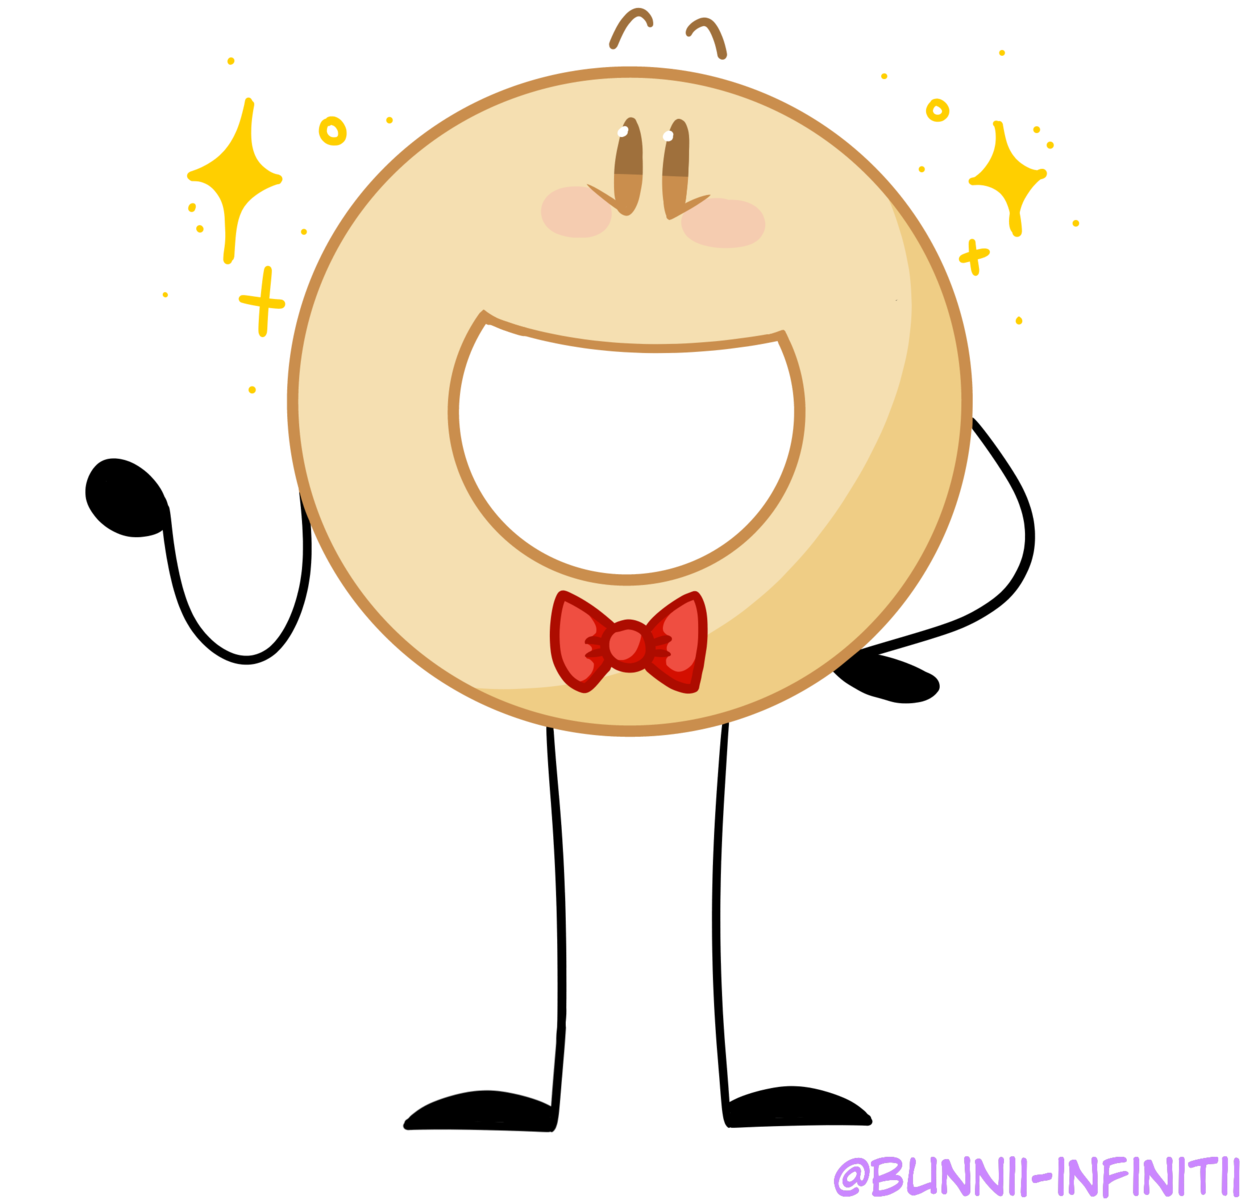 The New Game Host, Donut Its Transparent Click Pls - Northern Tool And Equipment (1280x1337)